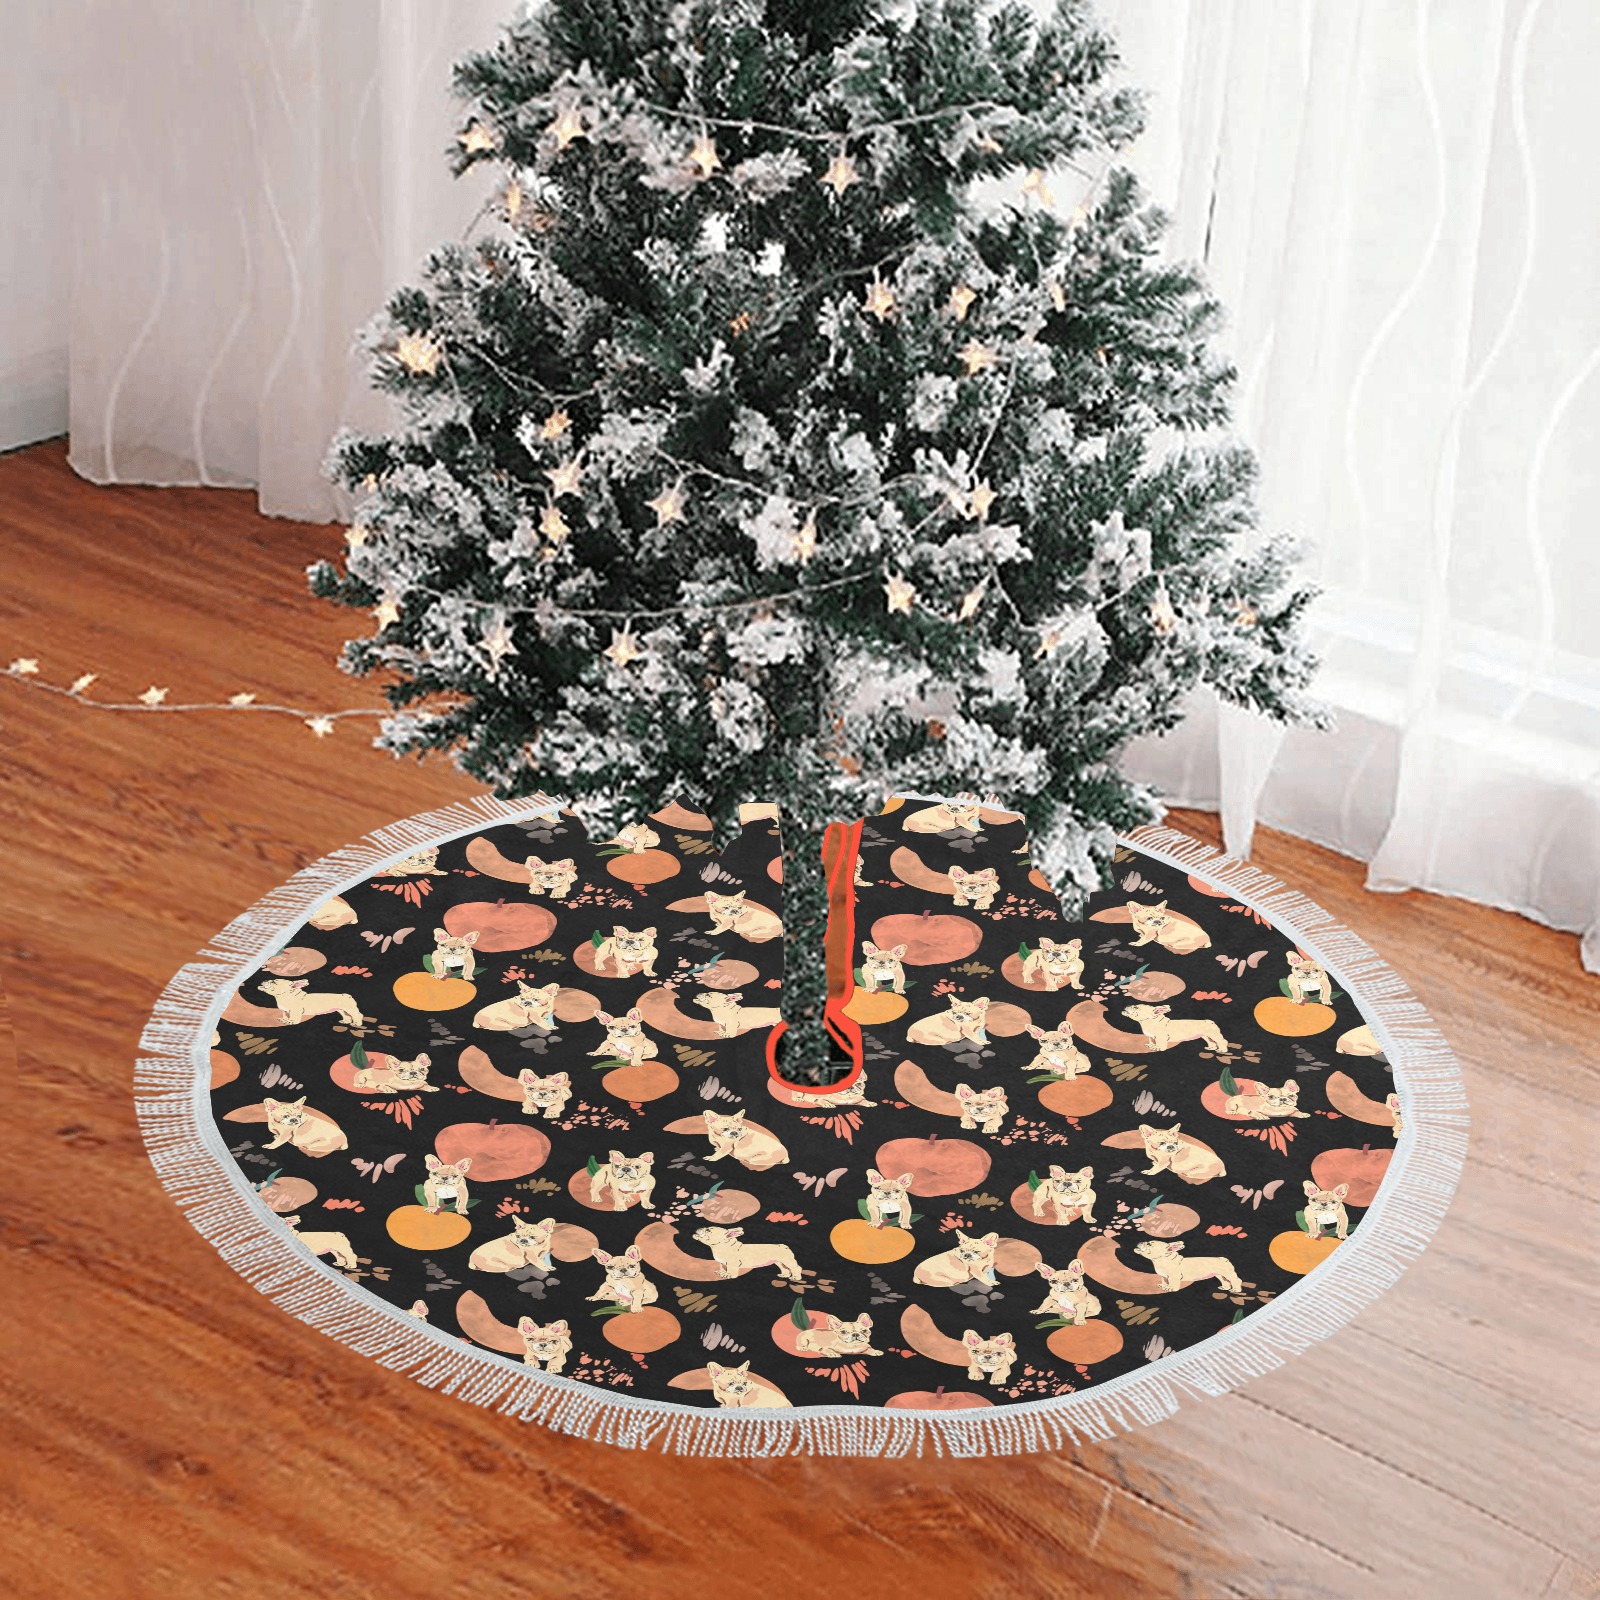 Puppies in the peaches B-02 Thick Fringe Christmas Tree Skirt 36"x36"